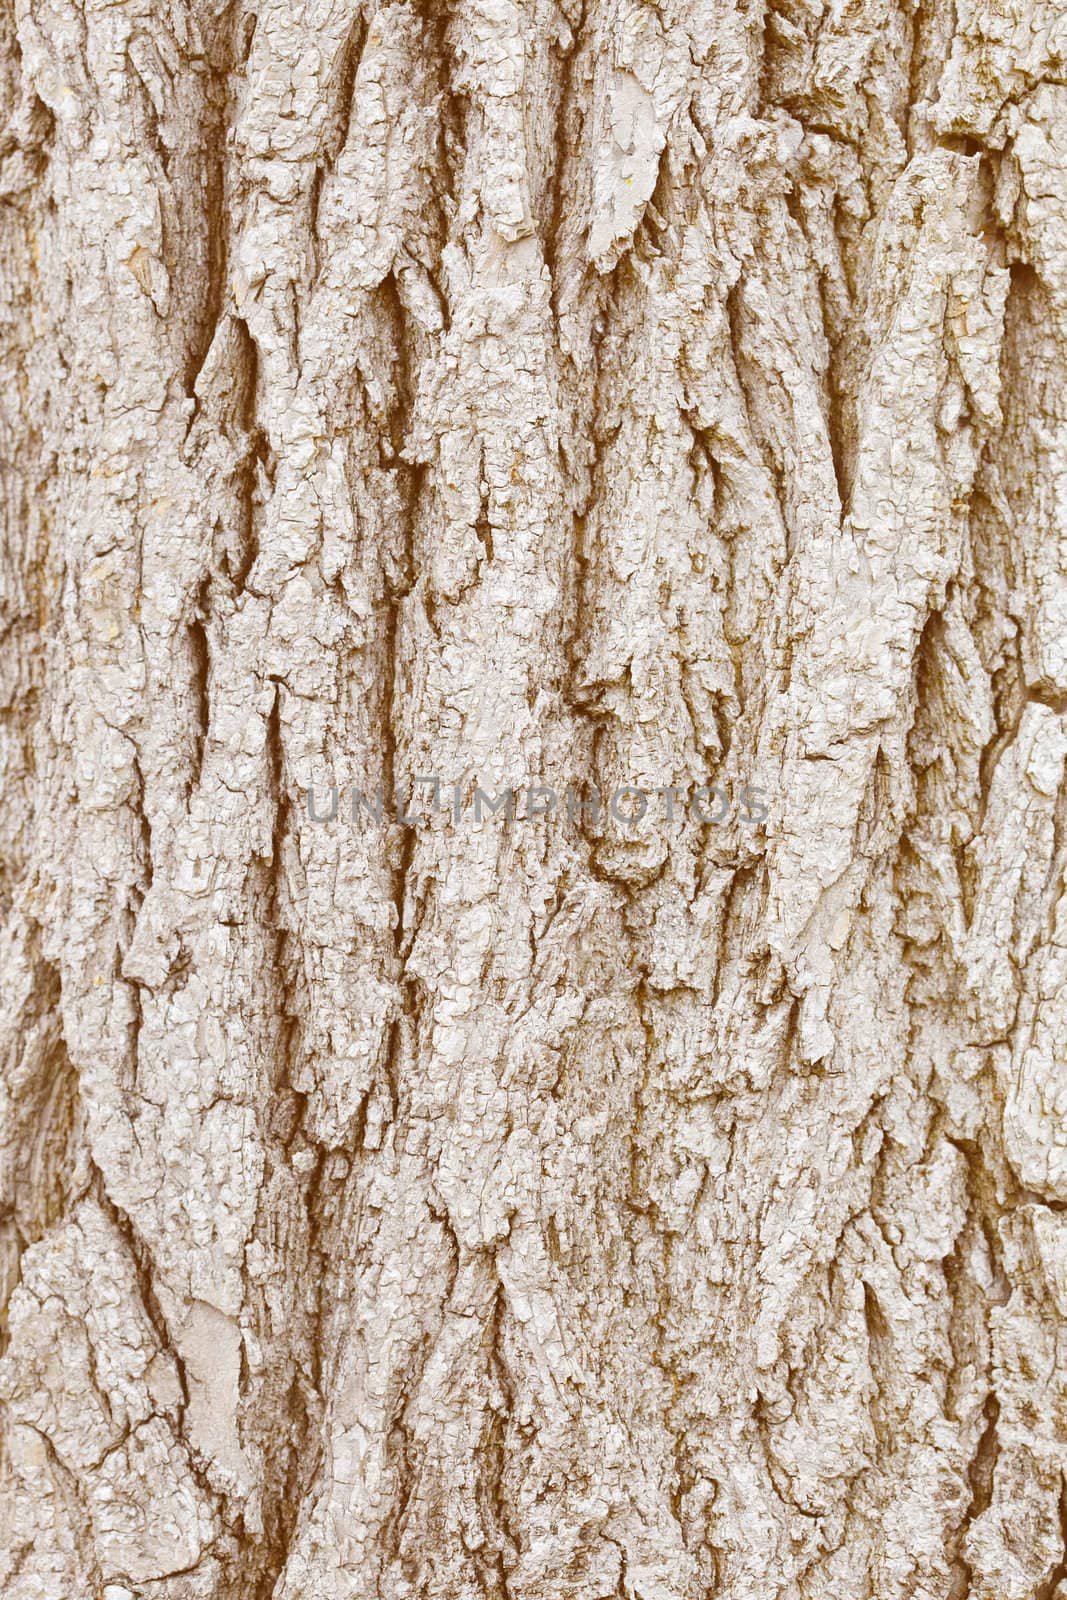 The bark of old wood - natural background